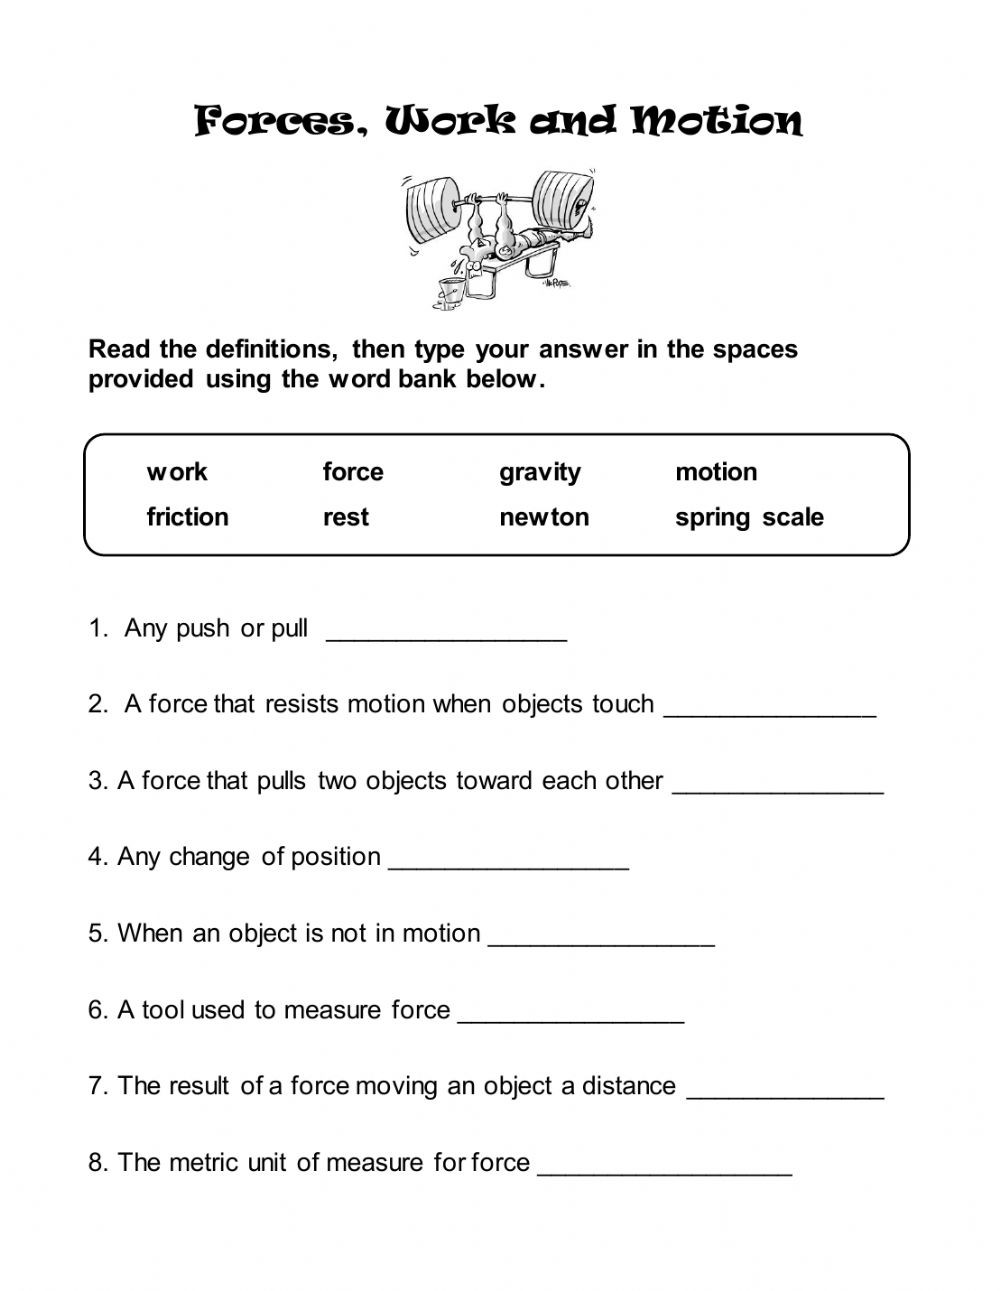 Forces and Motion Worksheet forces Work and Motion Interactive Worksheet